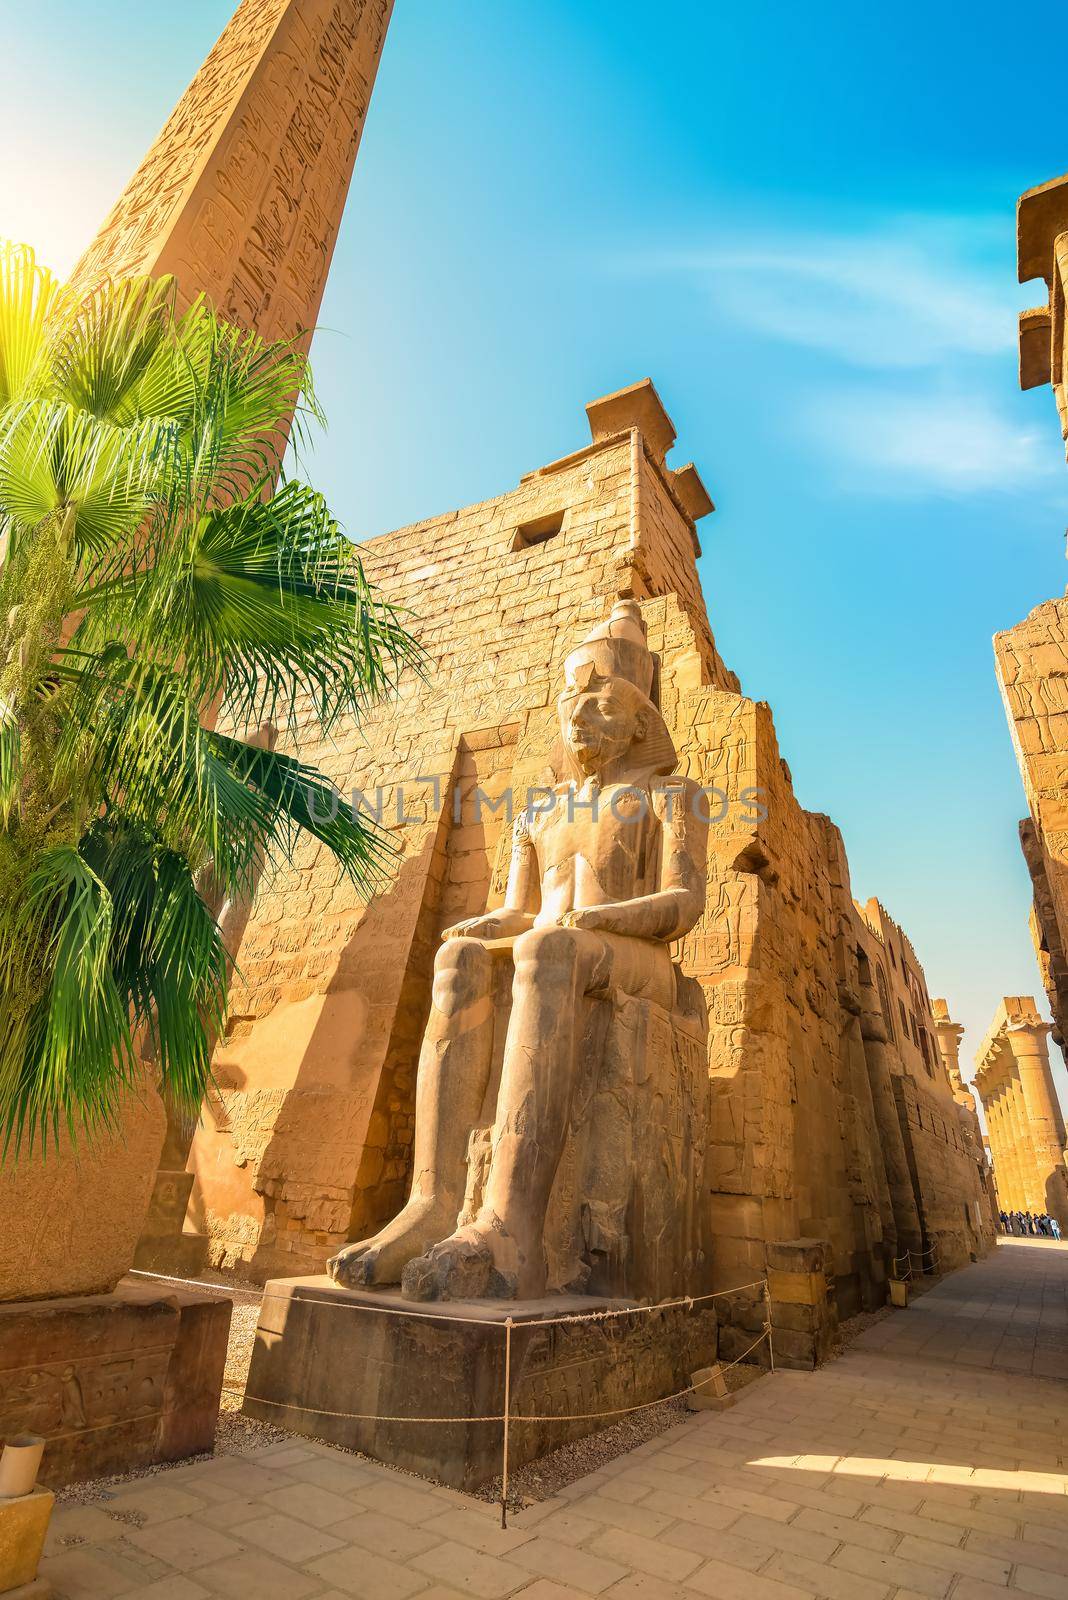 Luxor Karnak temple. The pylon with blue sky and palm